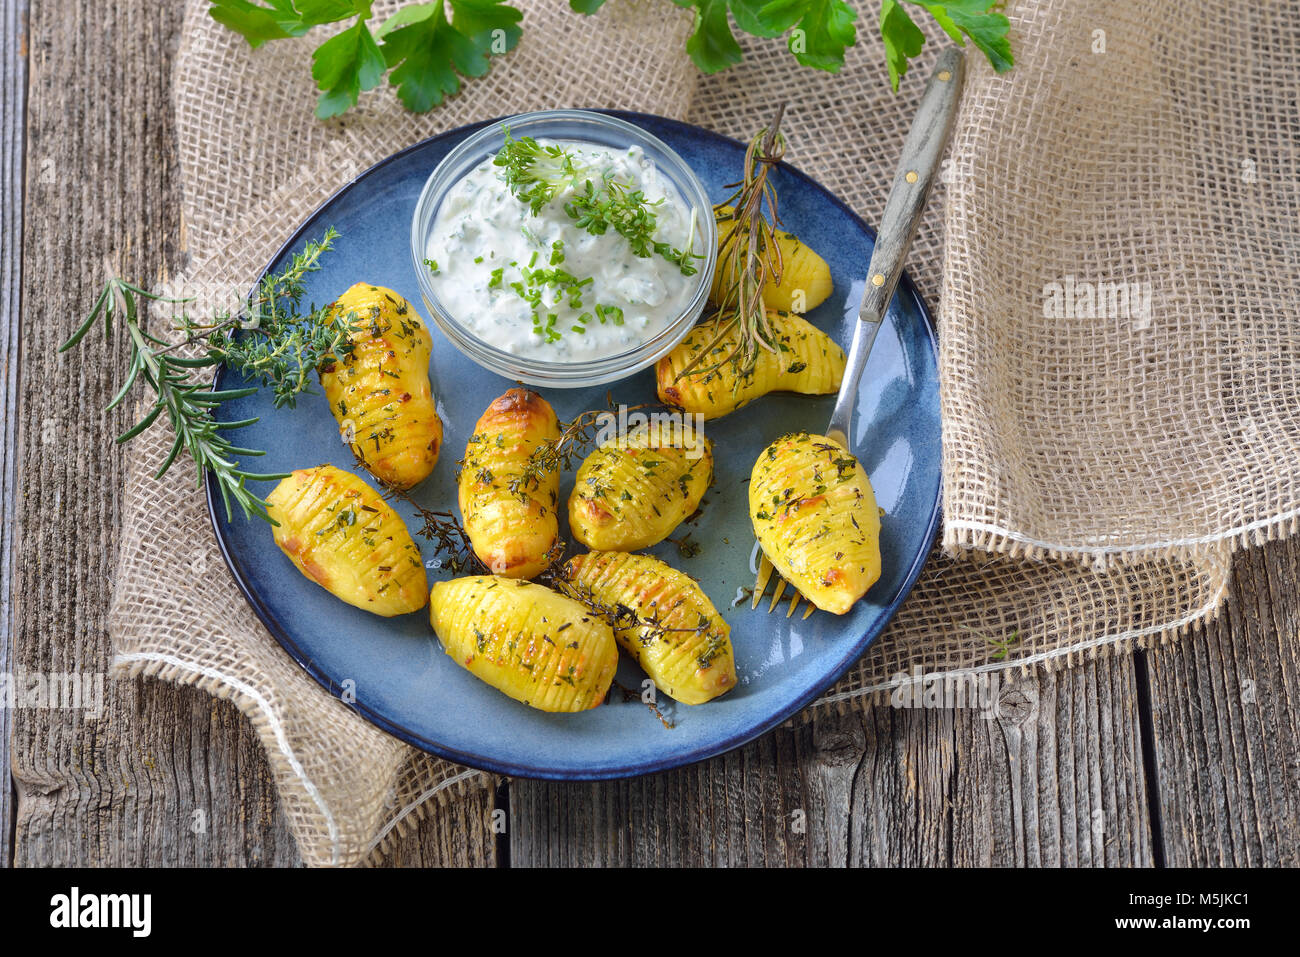 Vegetarian meal: Small potatoes baked with olive oil and served with fresh herb curd Stock Photo